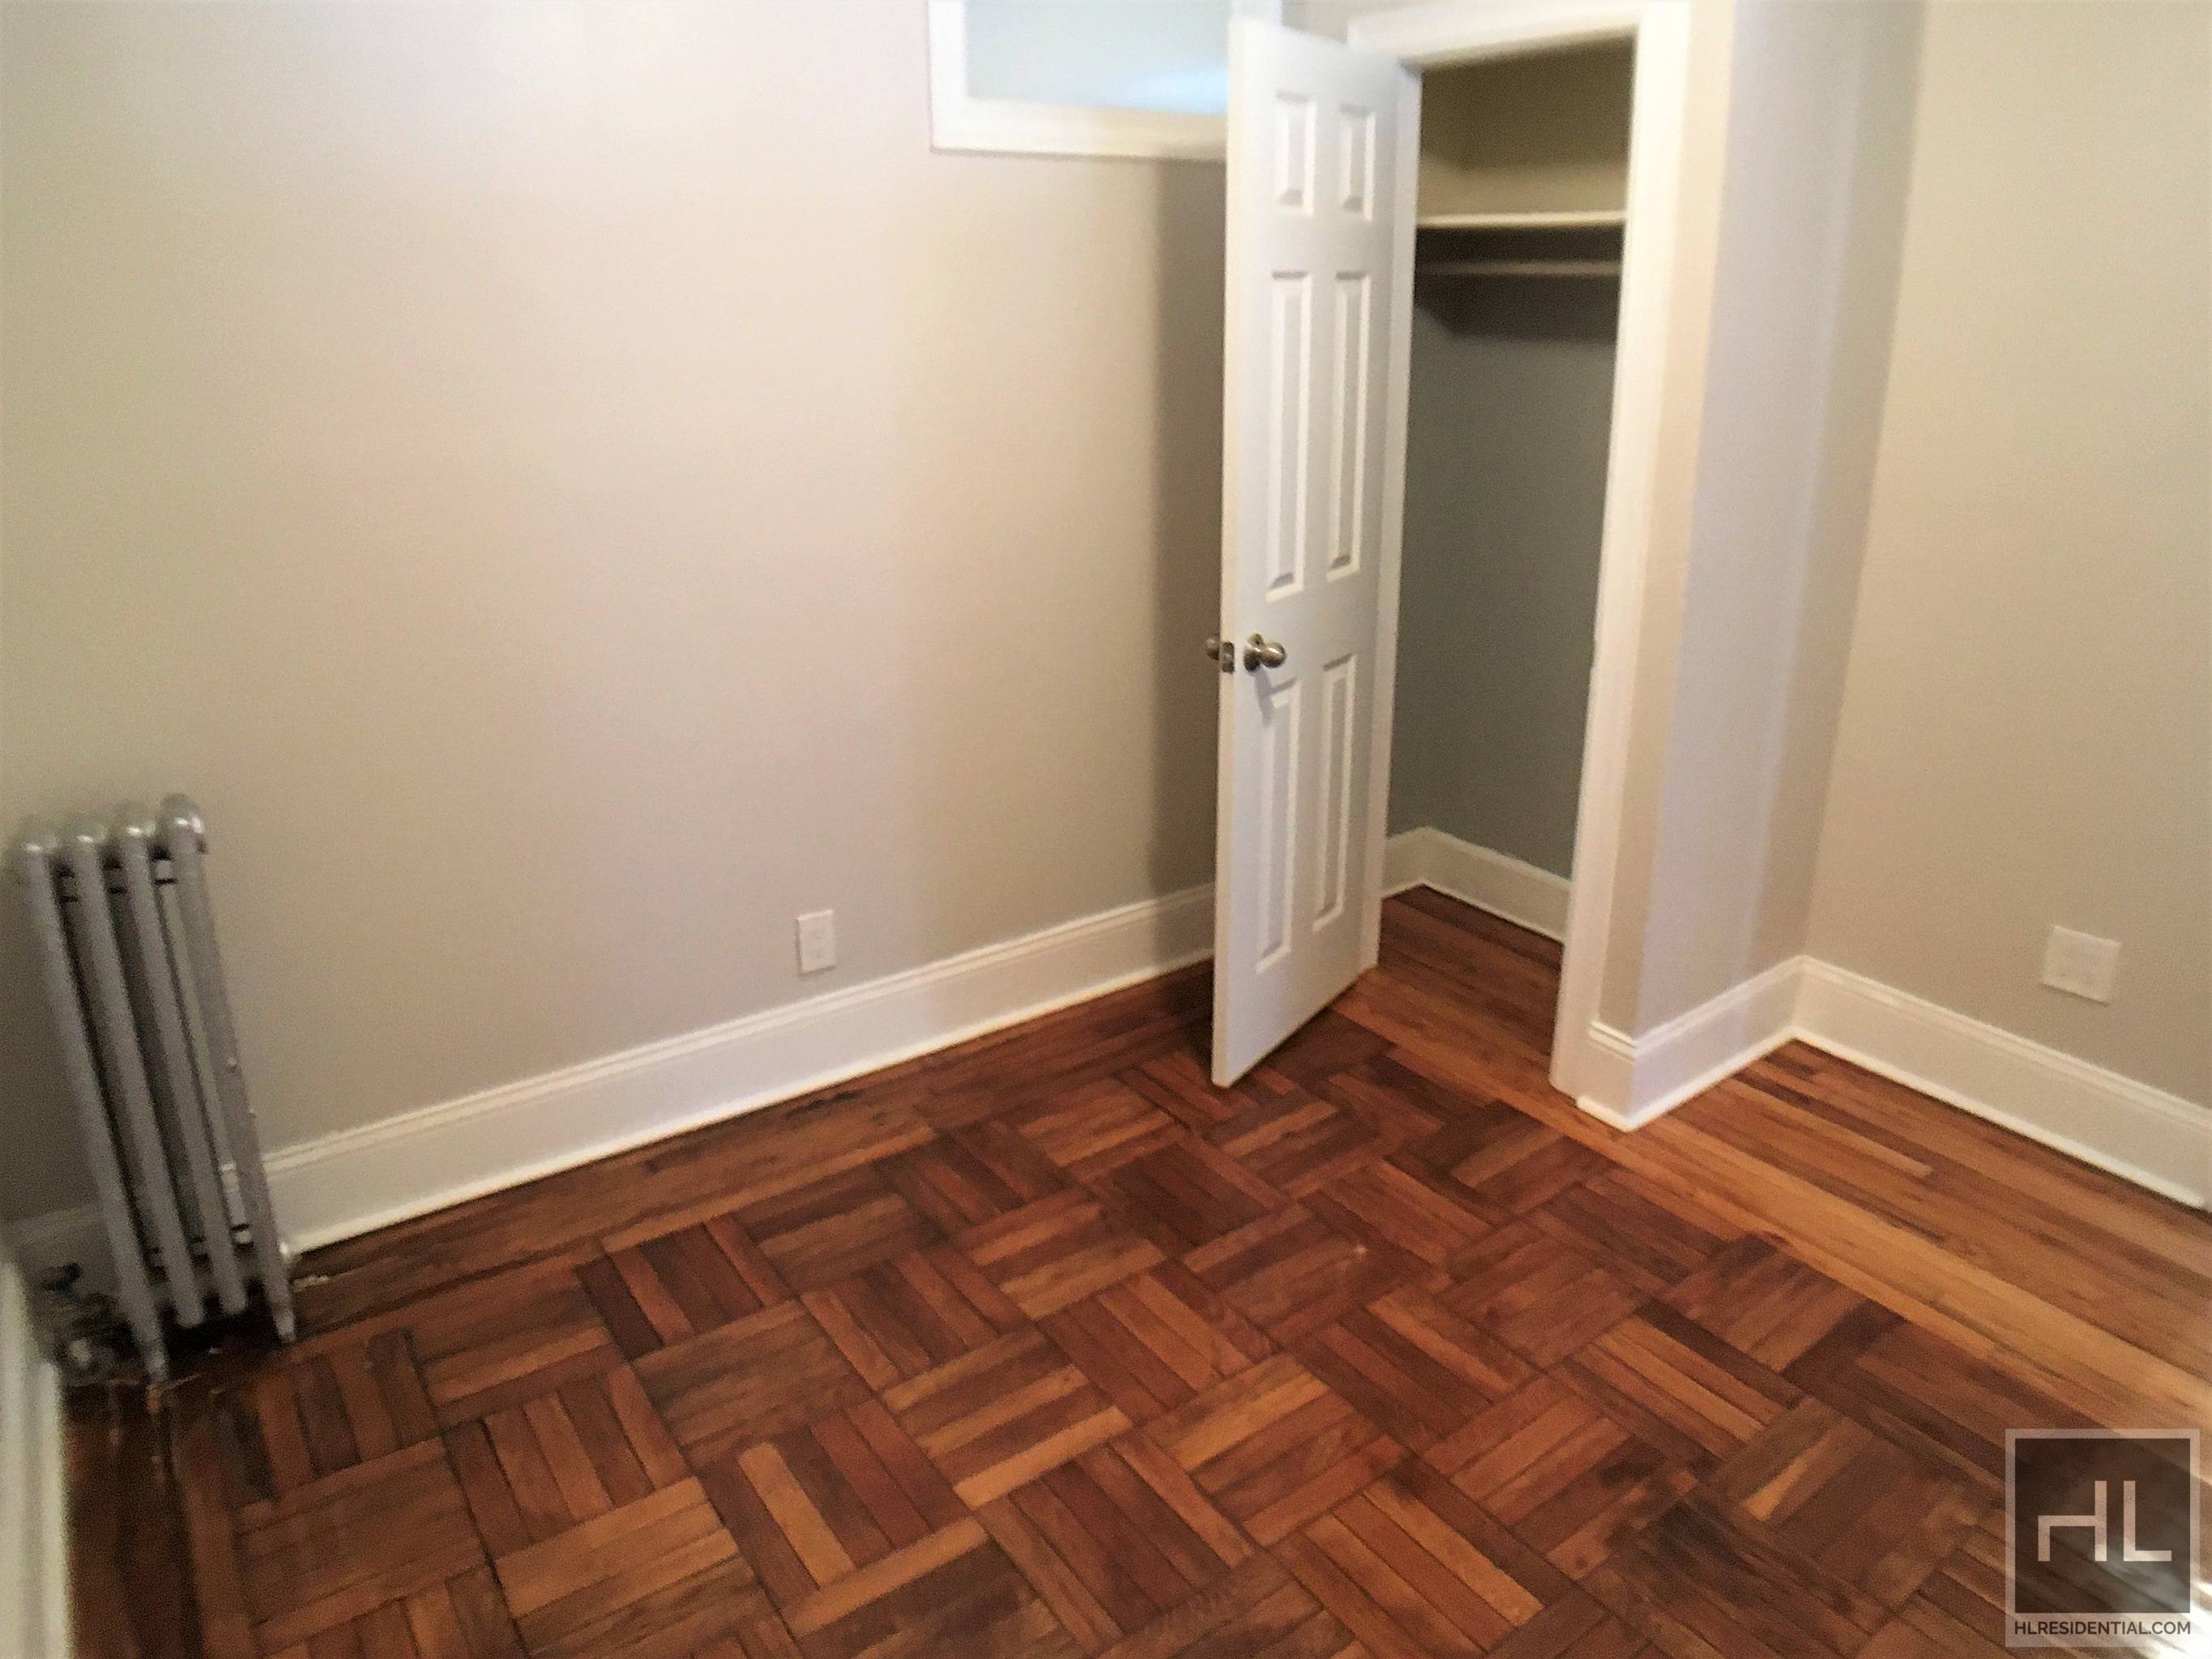 Newly renovated extremely bright 4 bedrooms is available for immediate move in.